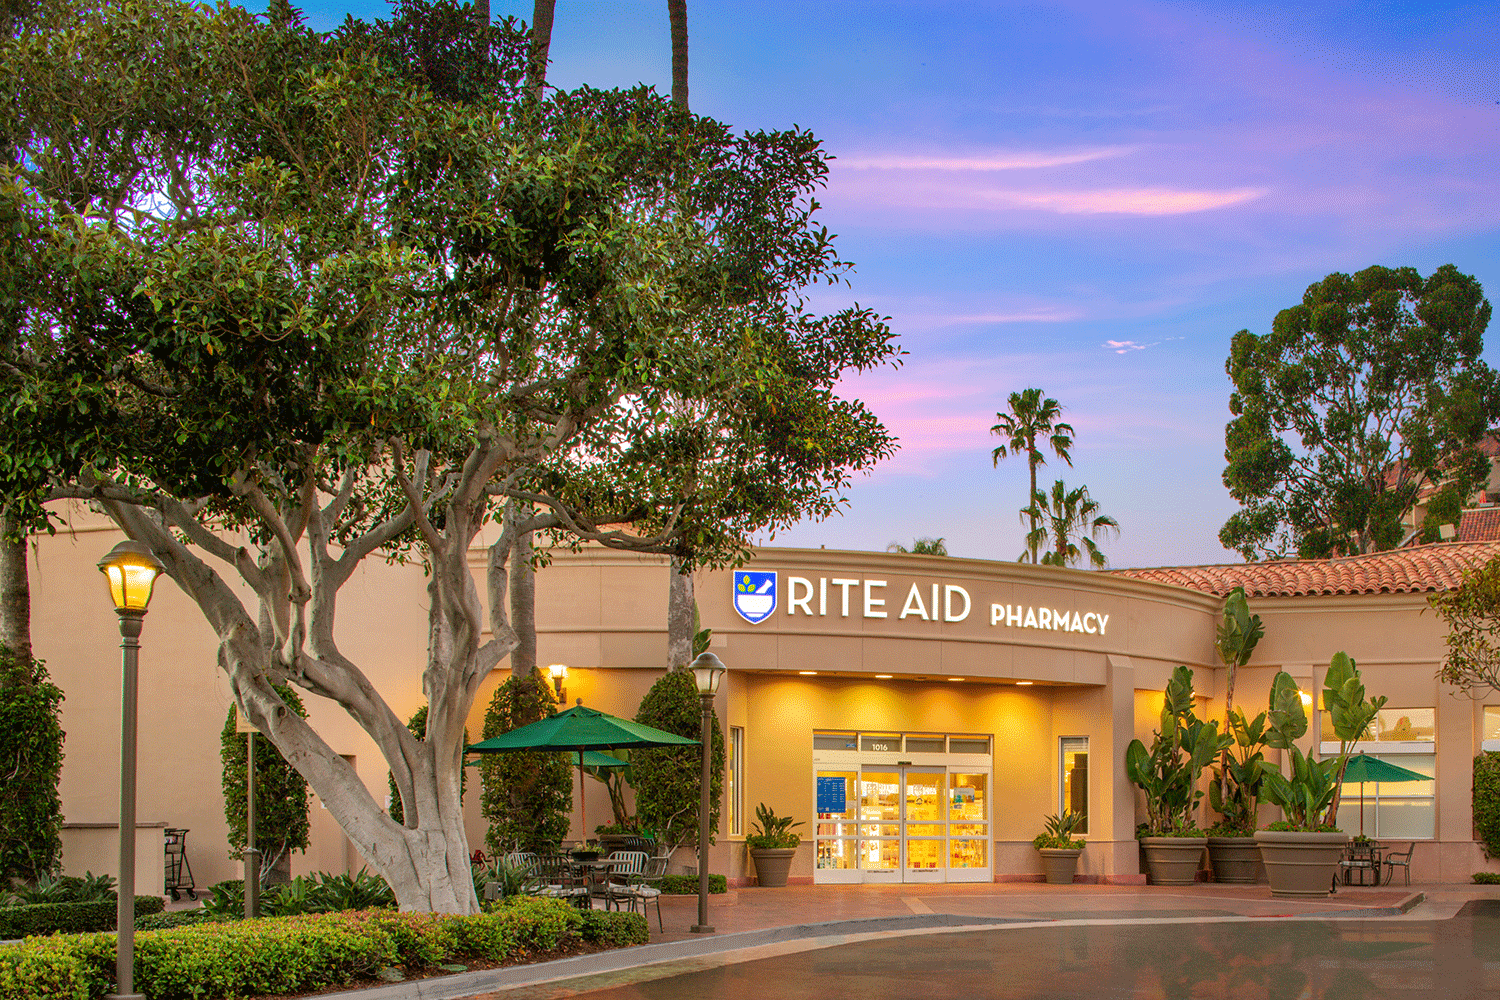  View of Rite Aid Pharmacy at dusk in Bayside Shopping Center 